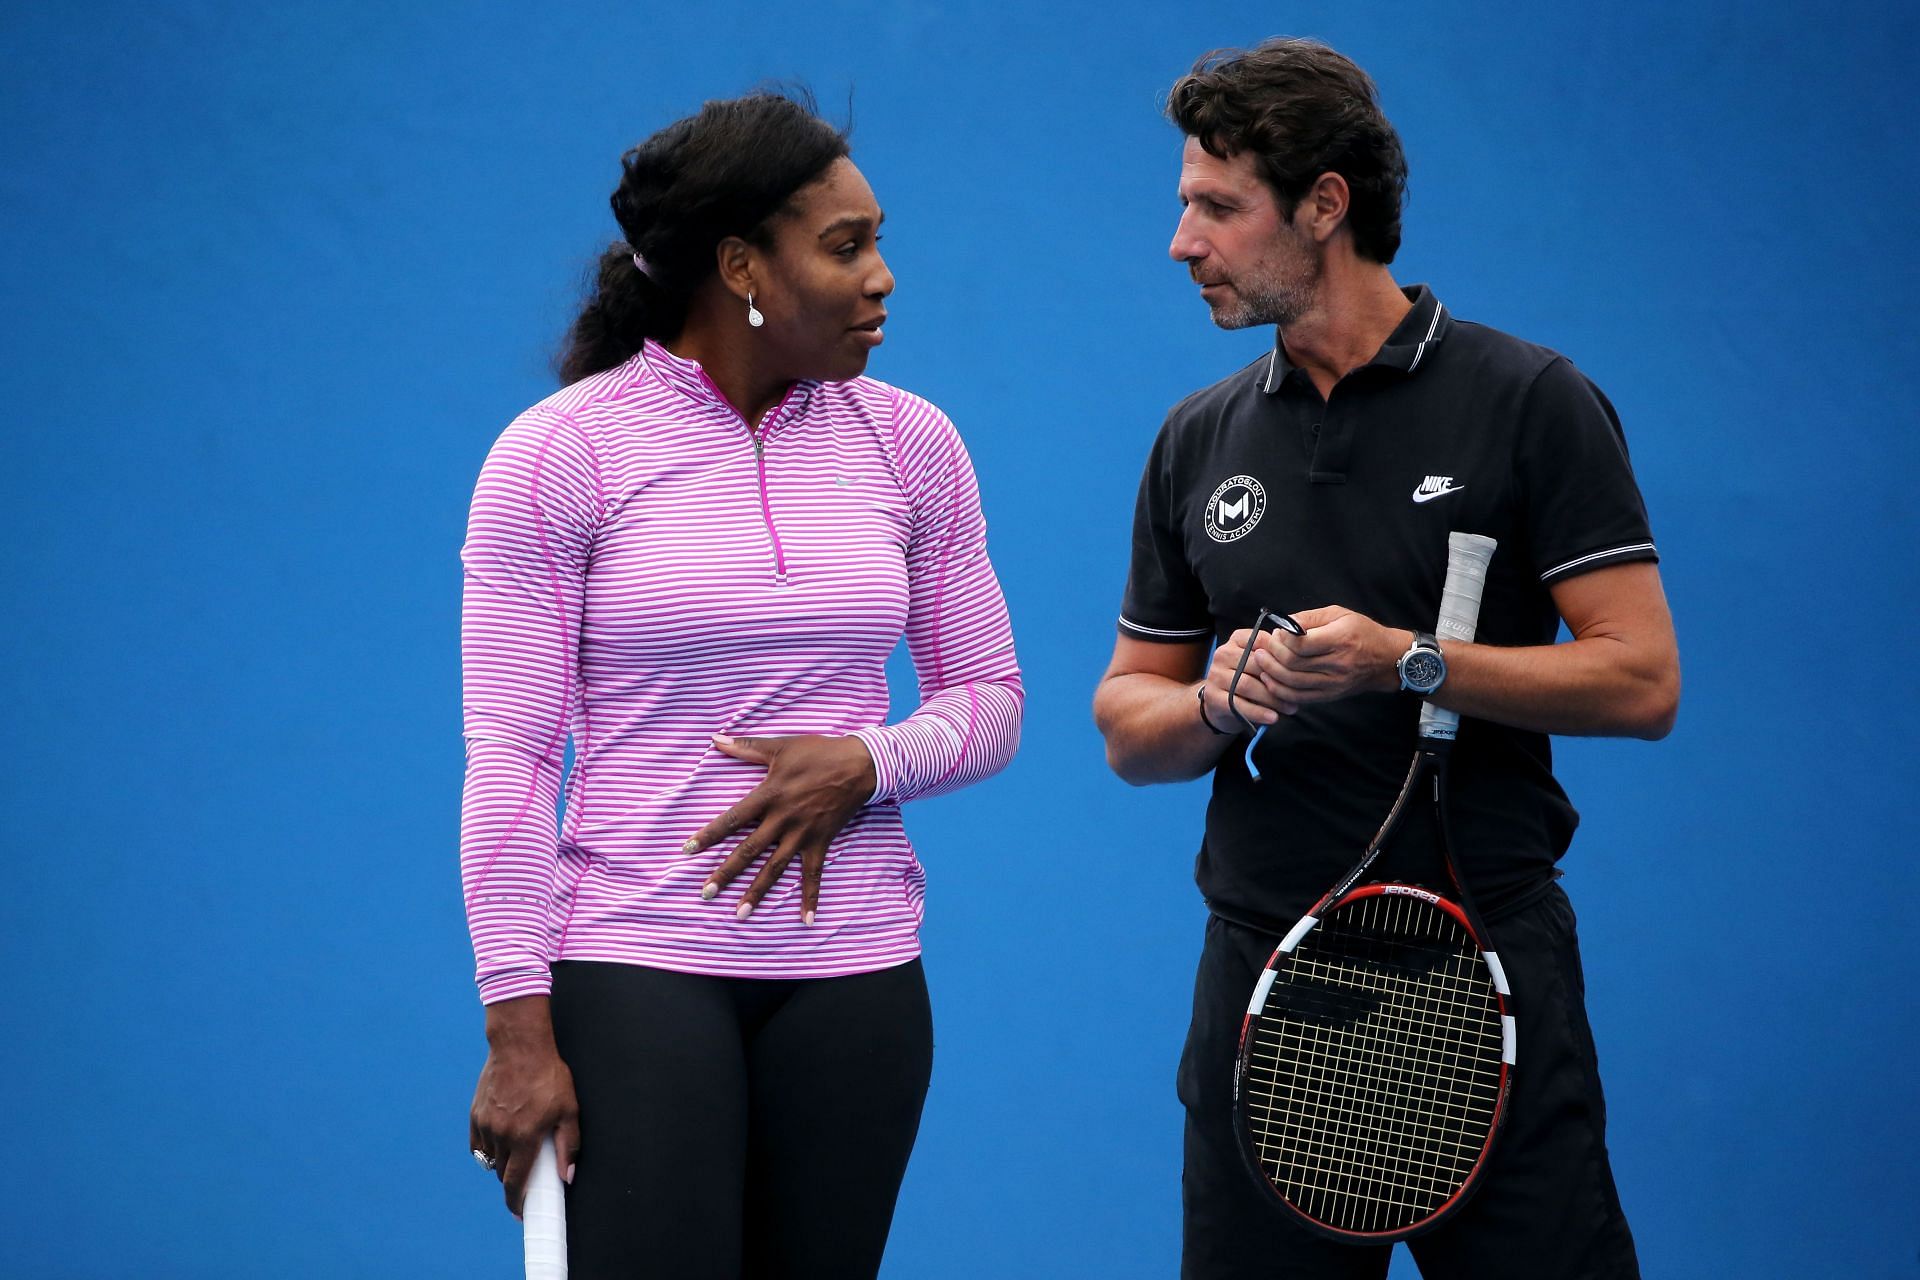 Patrick Mouratoglou formerly coached Serena Williams